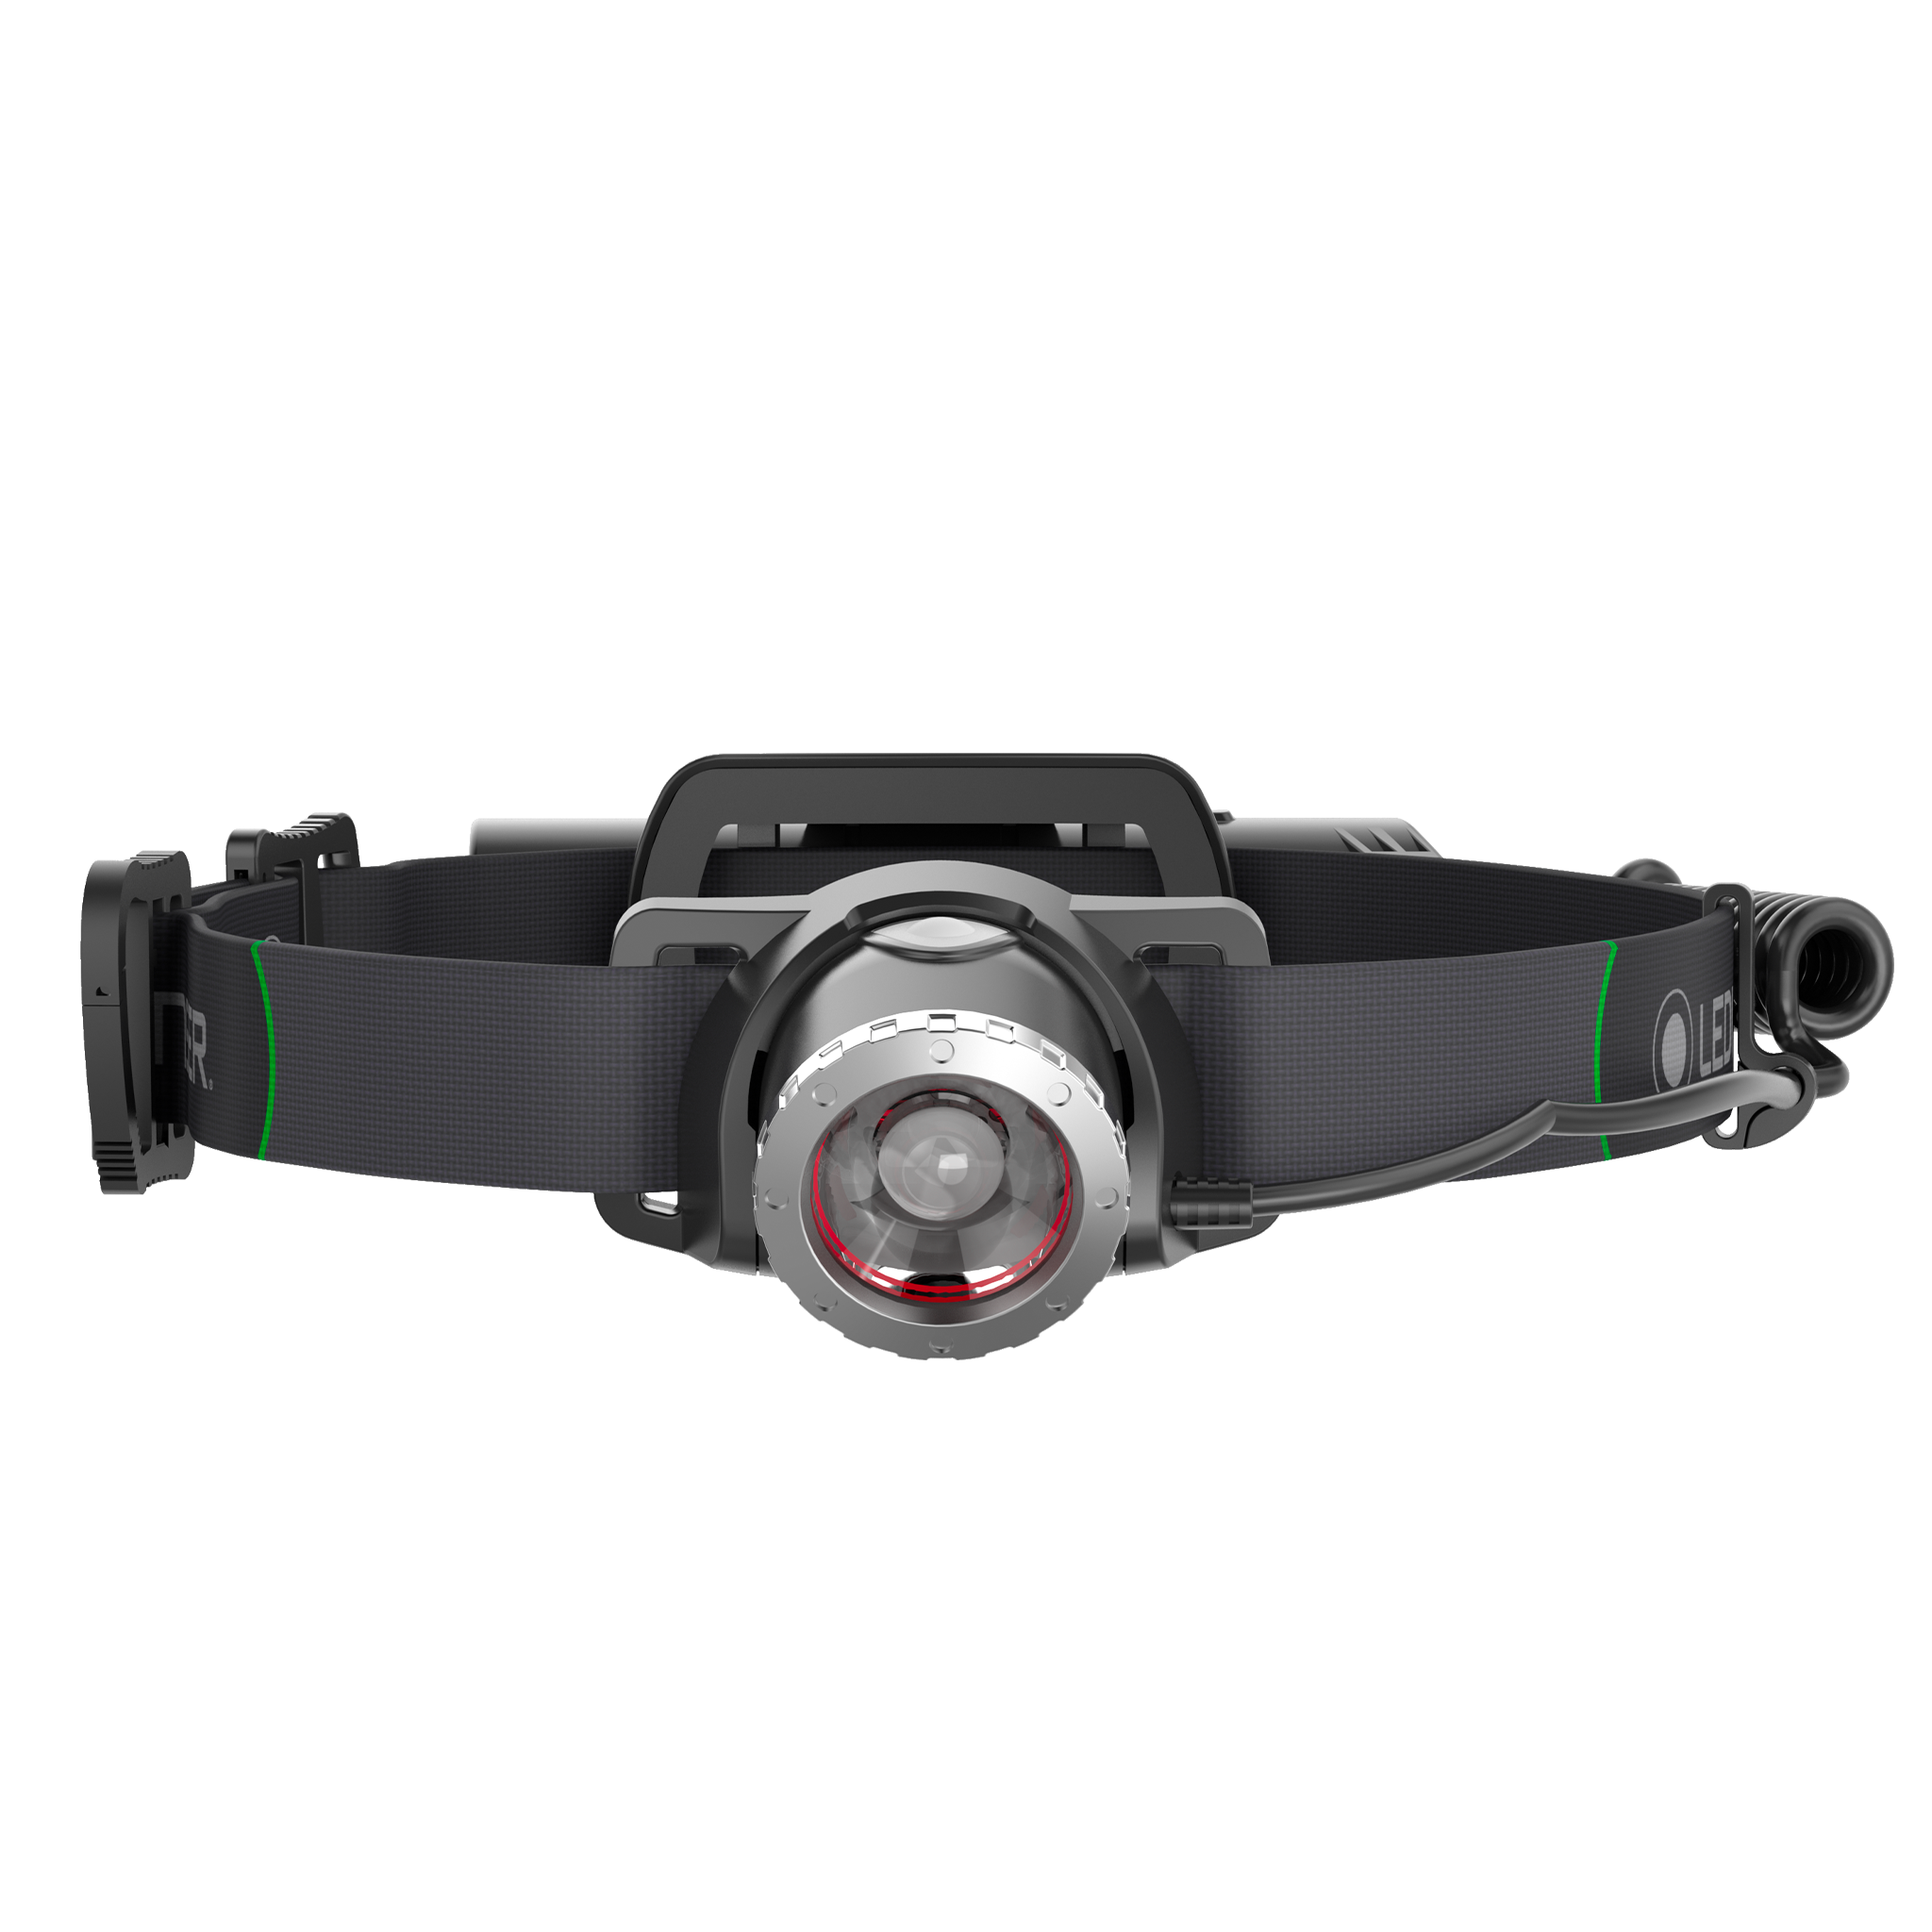 MH10 Rechargeable Head Torch